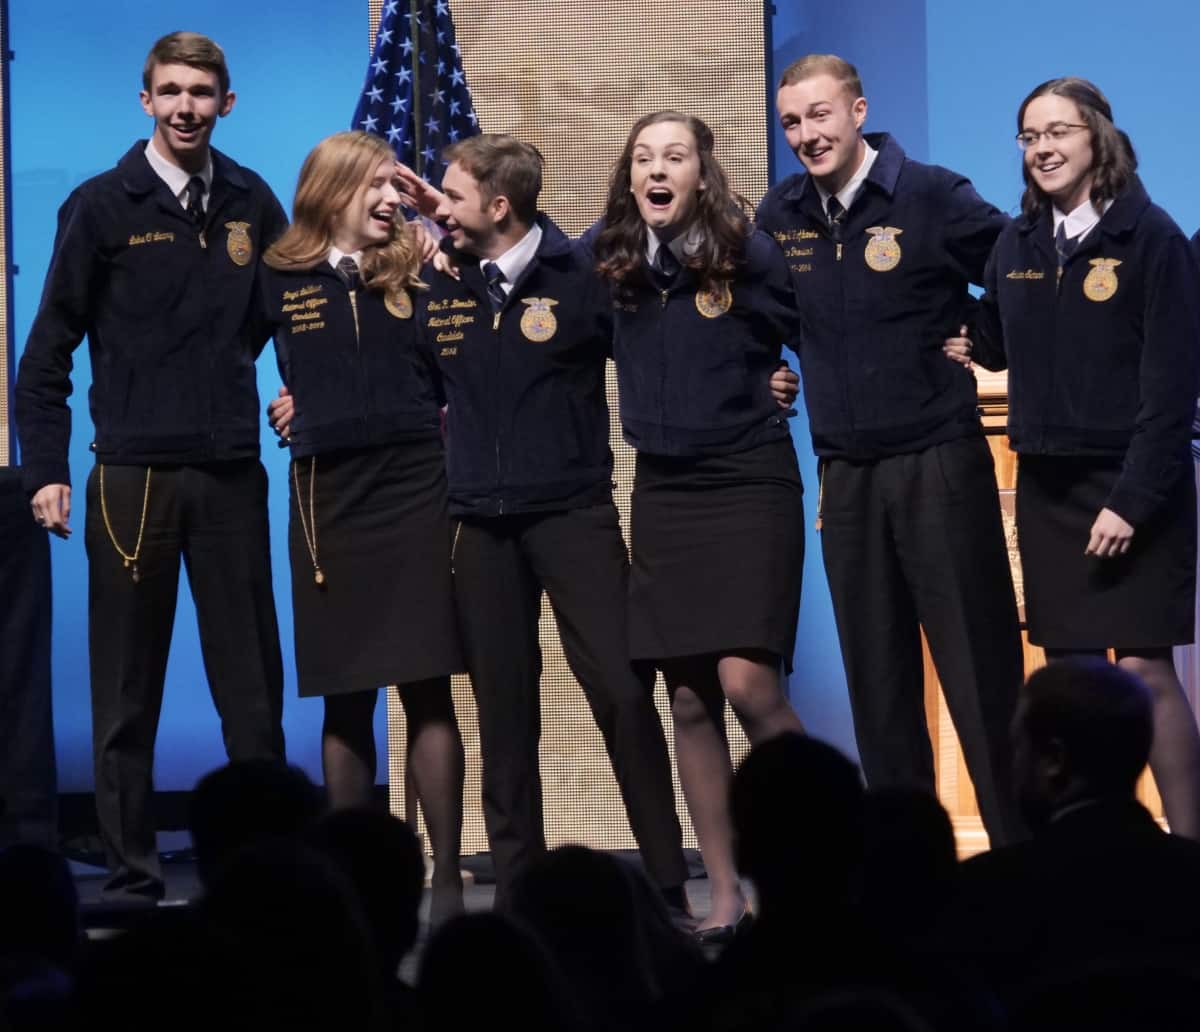 25 National Officer Candidates Advance to Phase 2 of the Selection